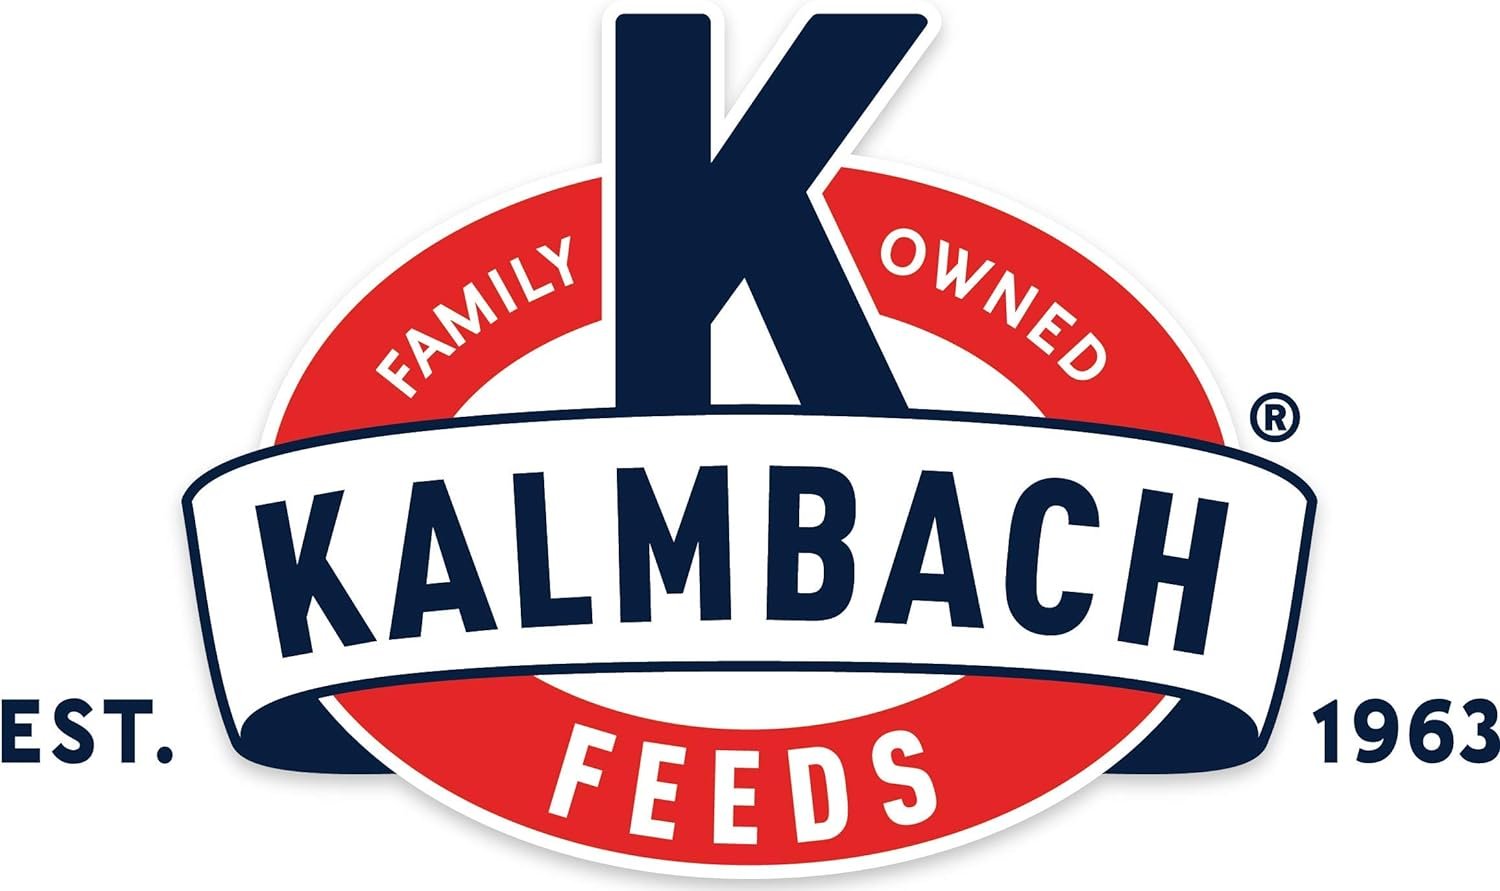 Kalmbach Feeds 17% Organic Crumbles Feed for Layer Chickens, 35 lb Bag